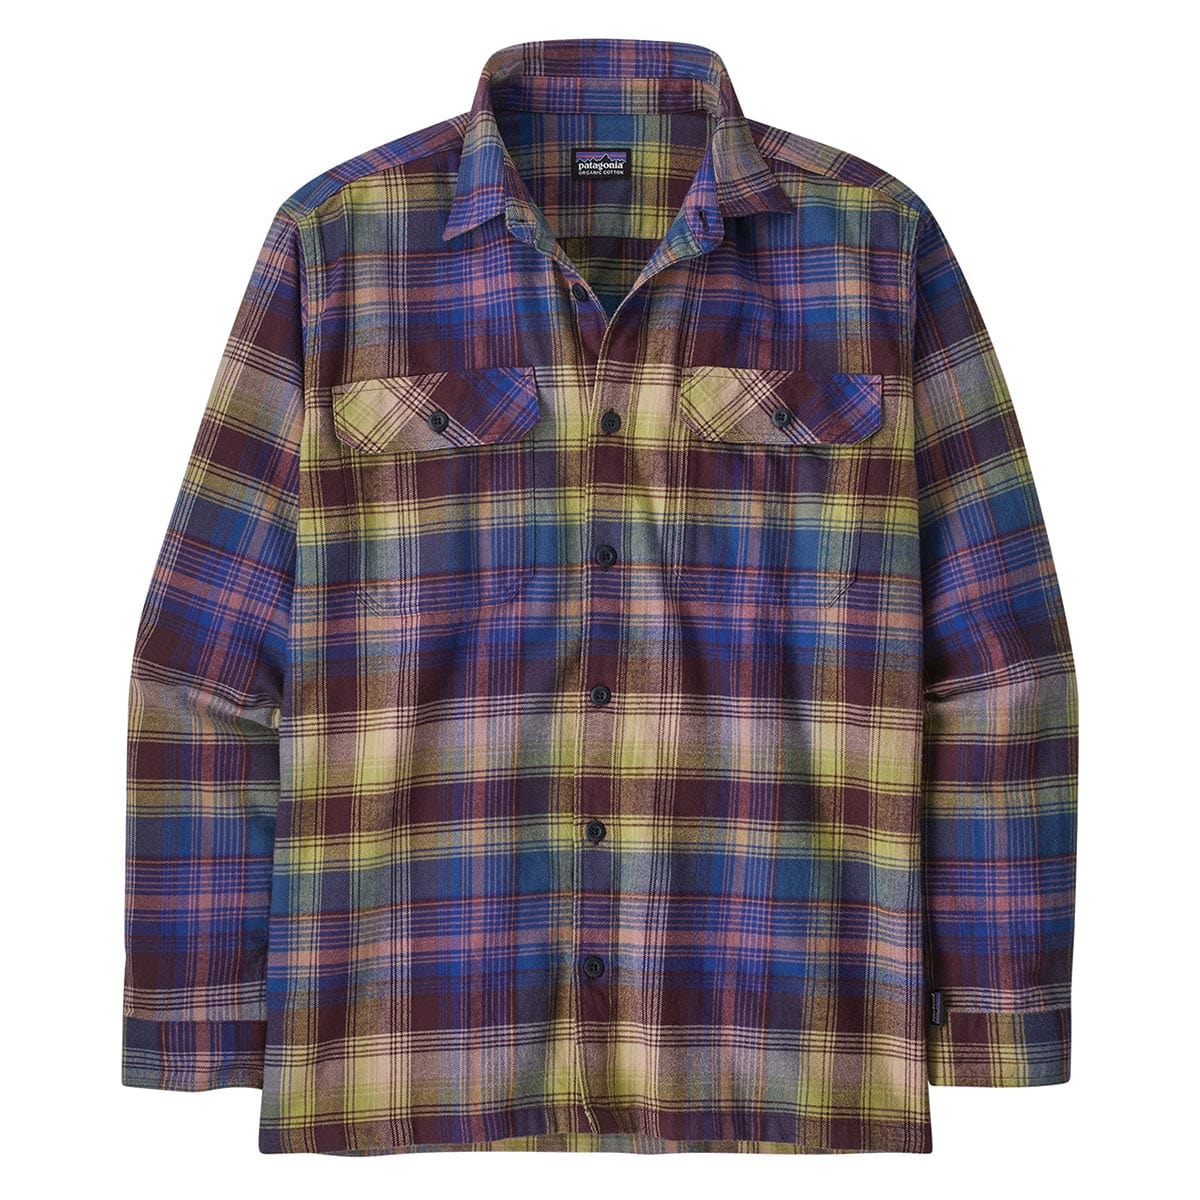 Patagonia Organic Cotton Midweight Fjord Flannel Shirt